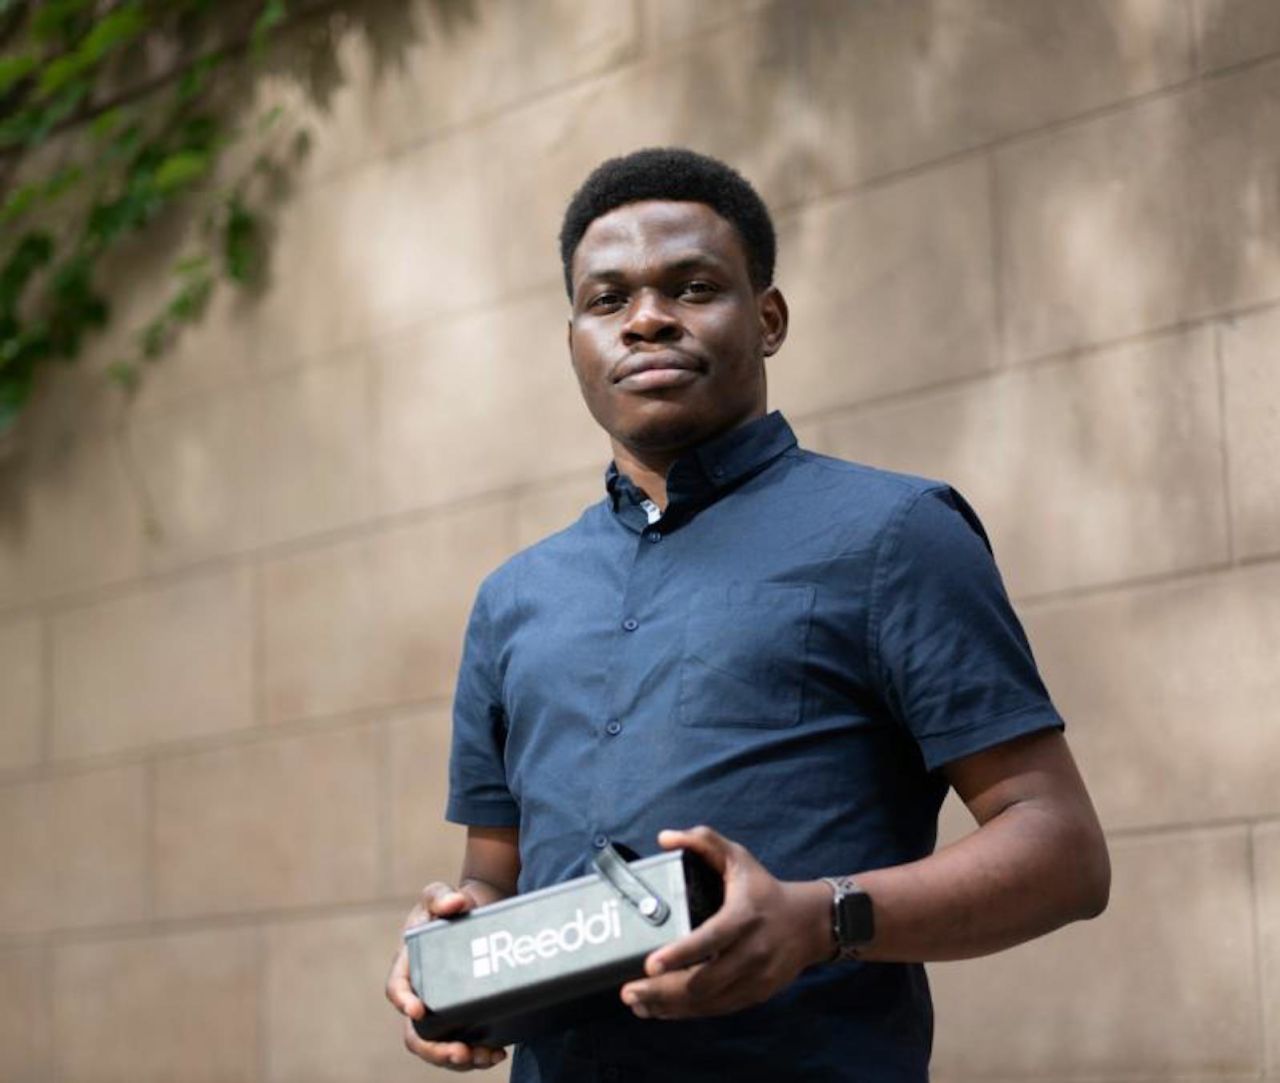 Olugbenga Olubanjo's company Reeddi makes lightweight solar-powered batteries that can be rented to customers for 24 hours and are able to power devices including TVs, laptops and refrigerators. 